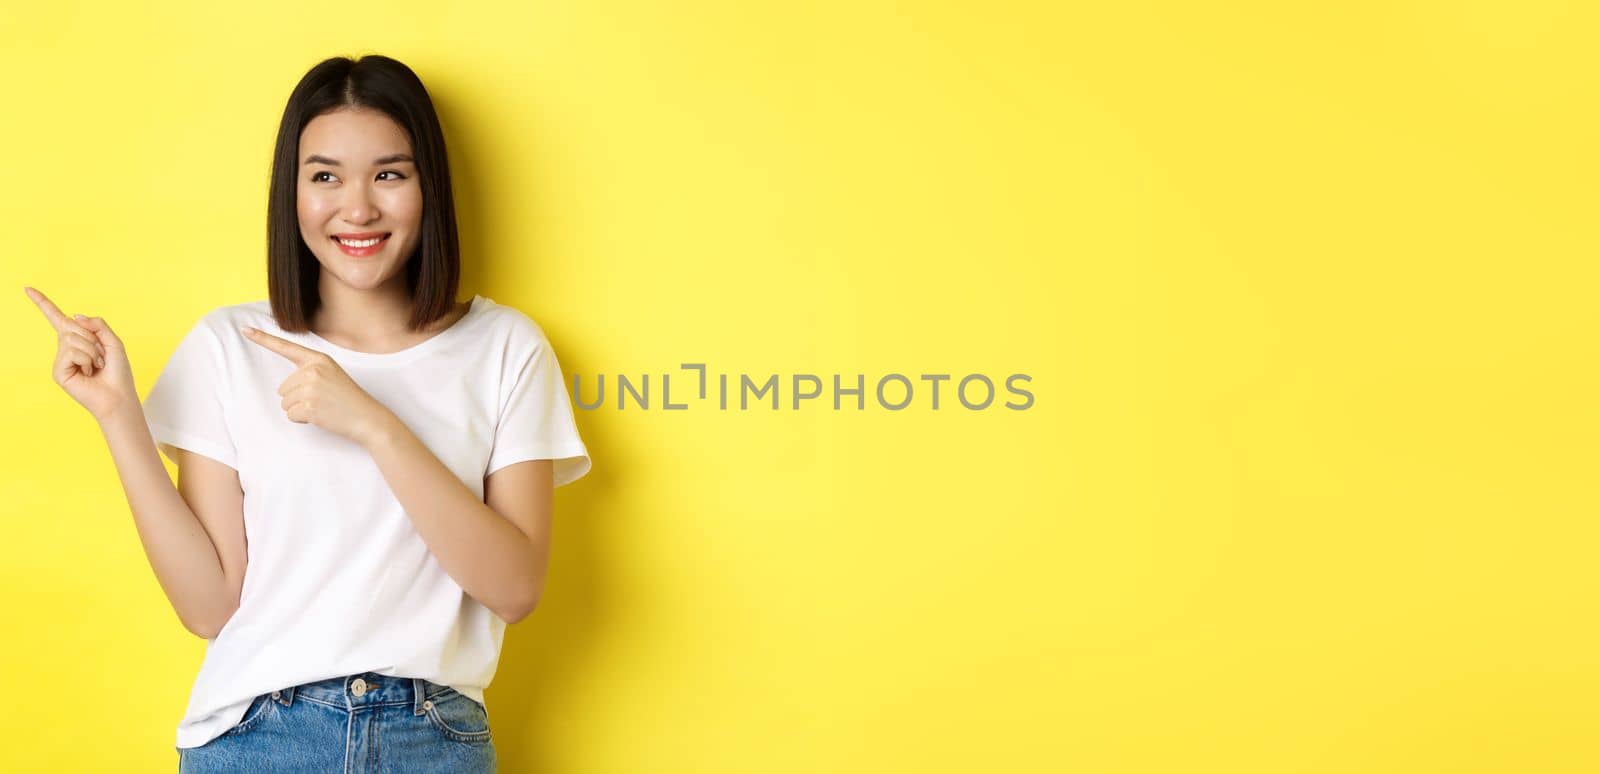 Beauty and fashion concept. Beautiful asian woman in white t-shirt pointing fingers left, standing over yellow background.